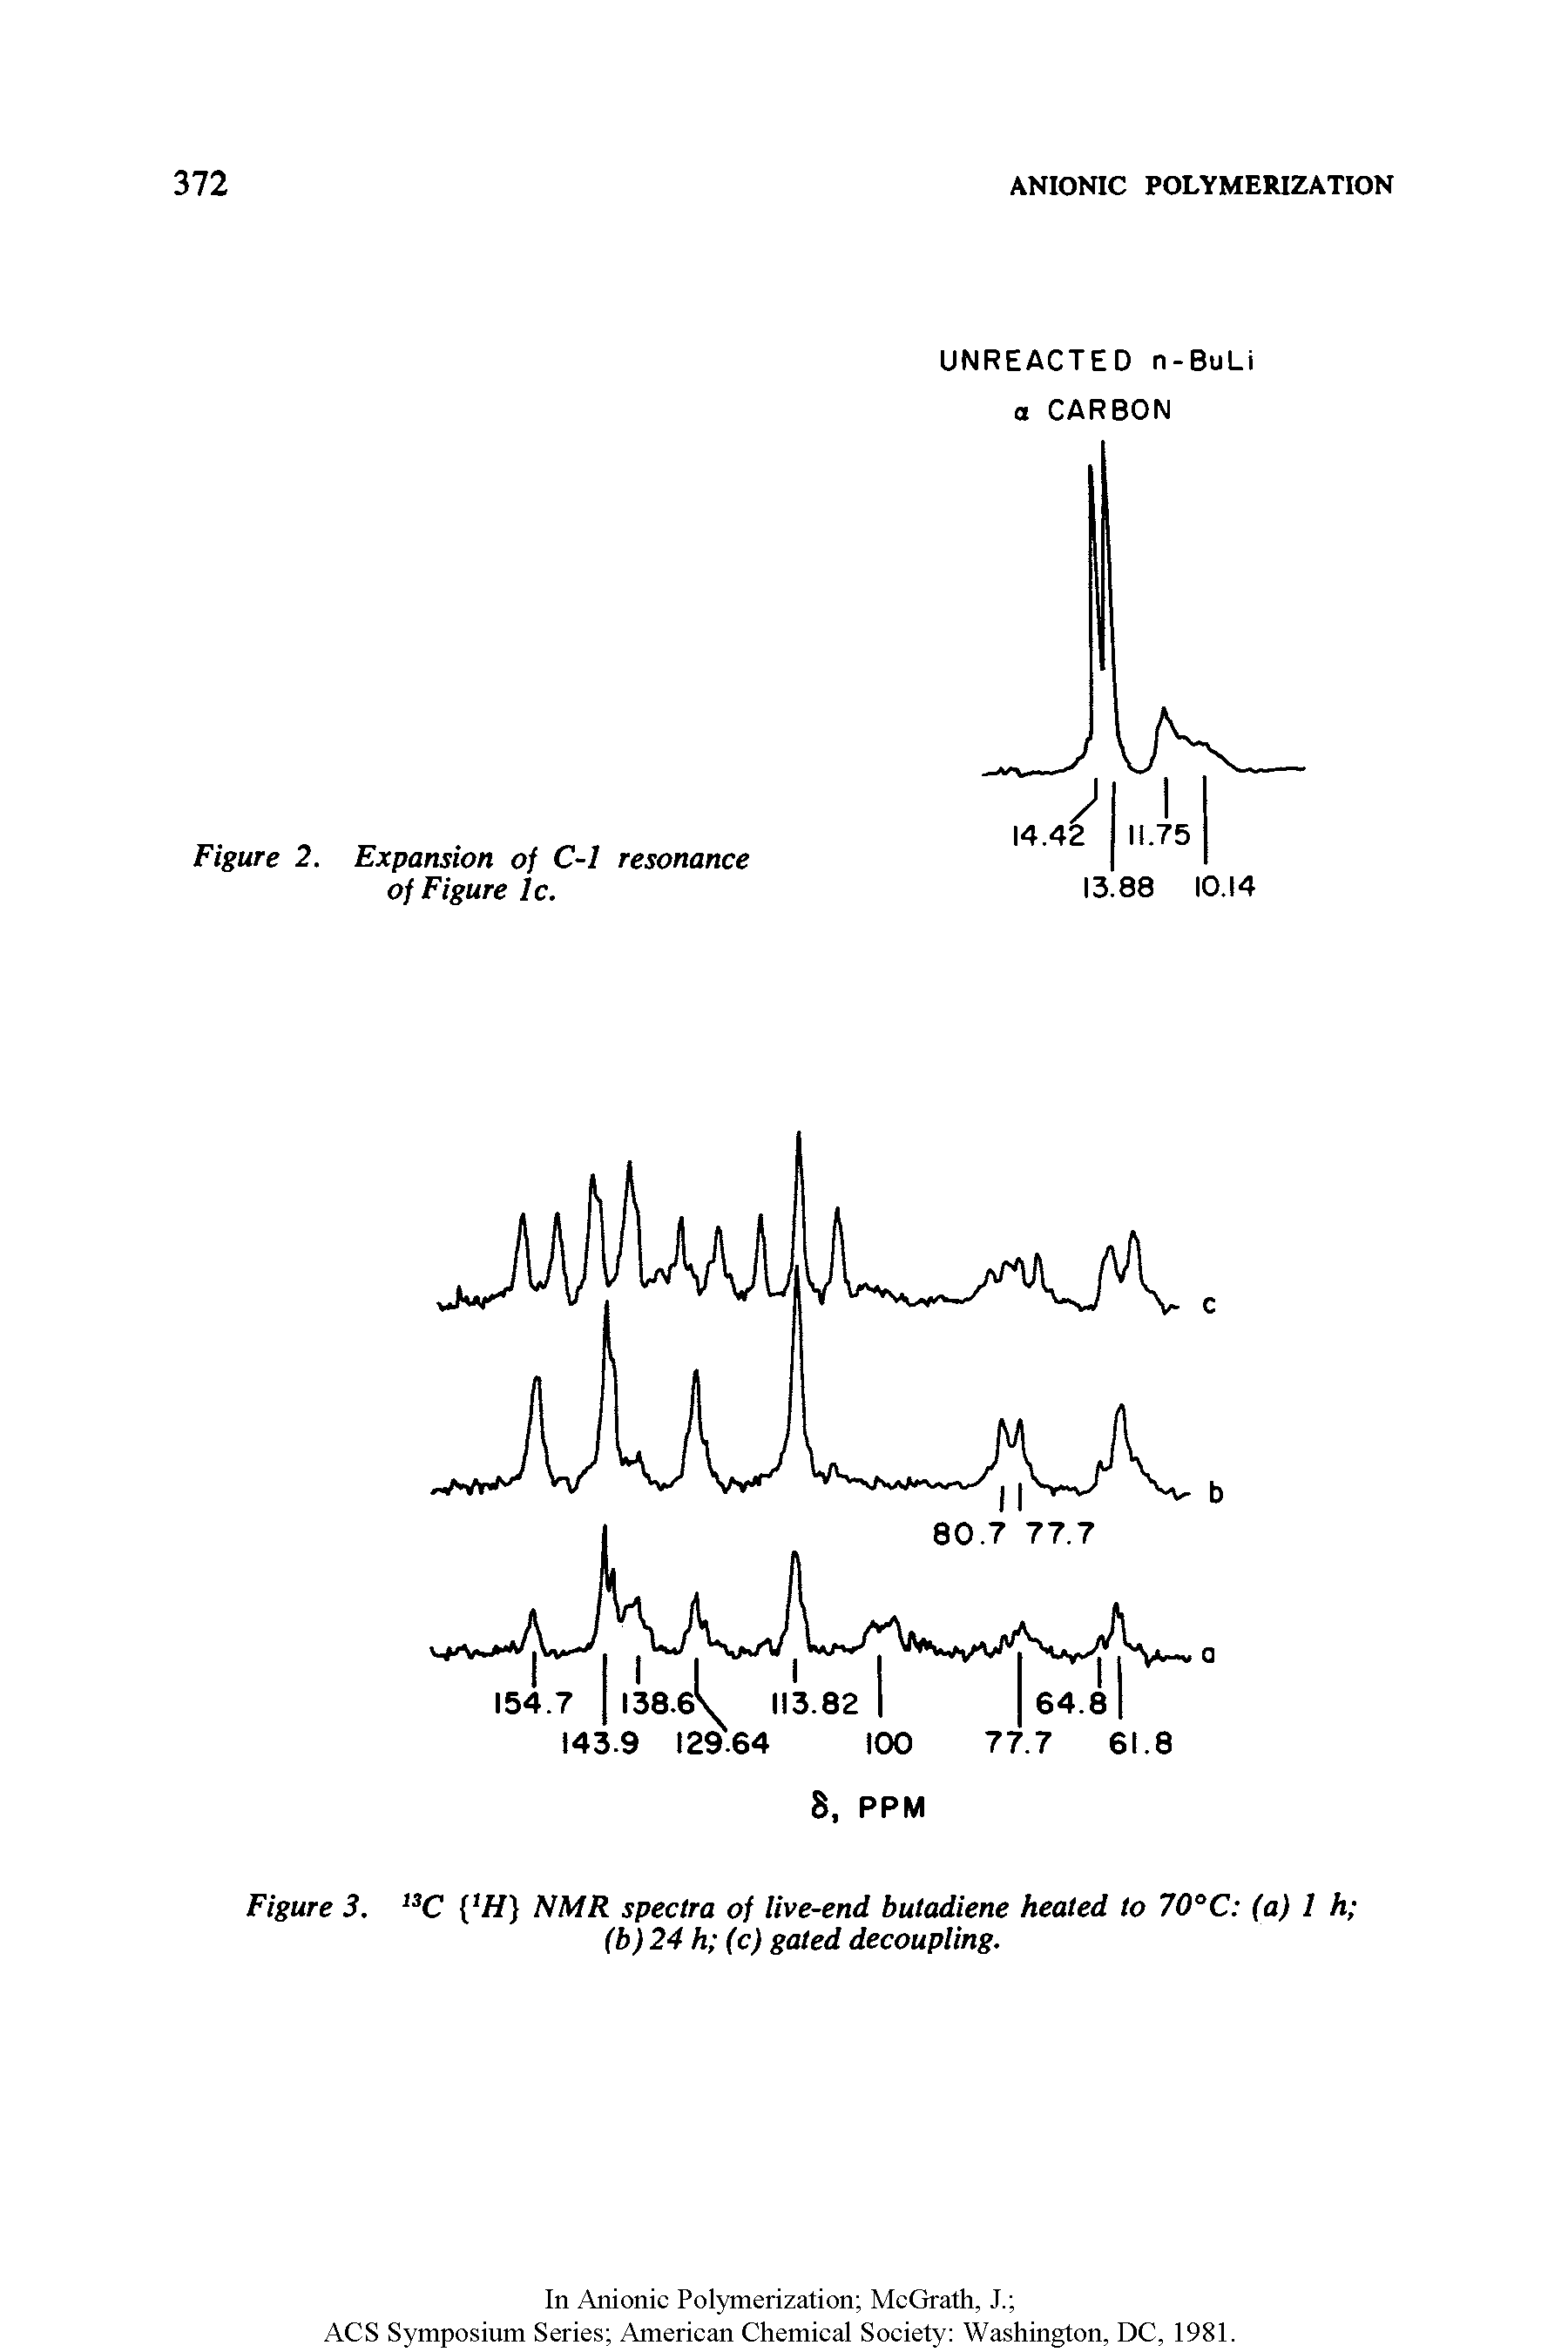 Figure 3. 13C NMR spectra of live-end butadiene heated to 70°C (a) 1 h (b)24 h (c) gated decoupling.